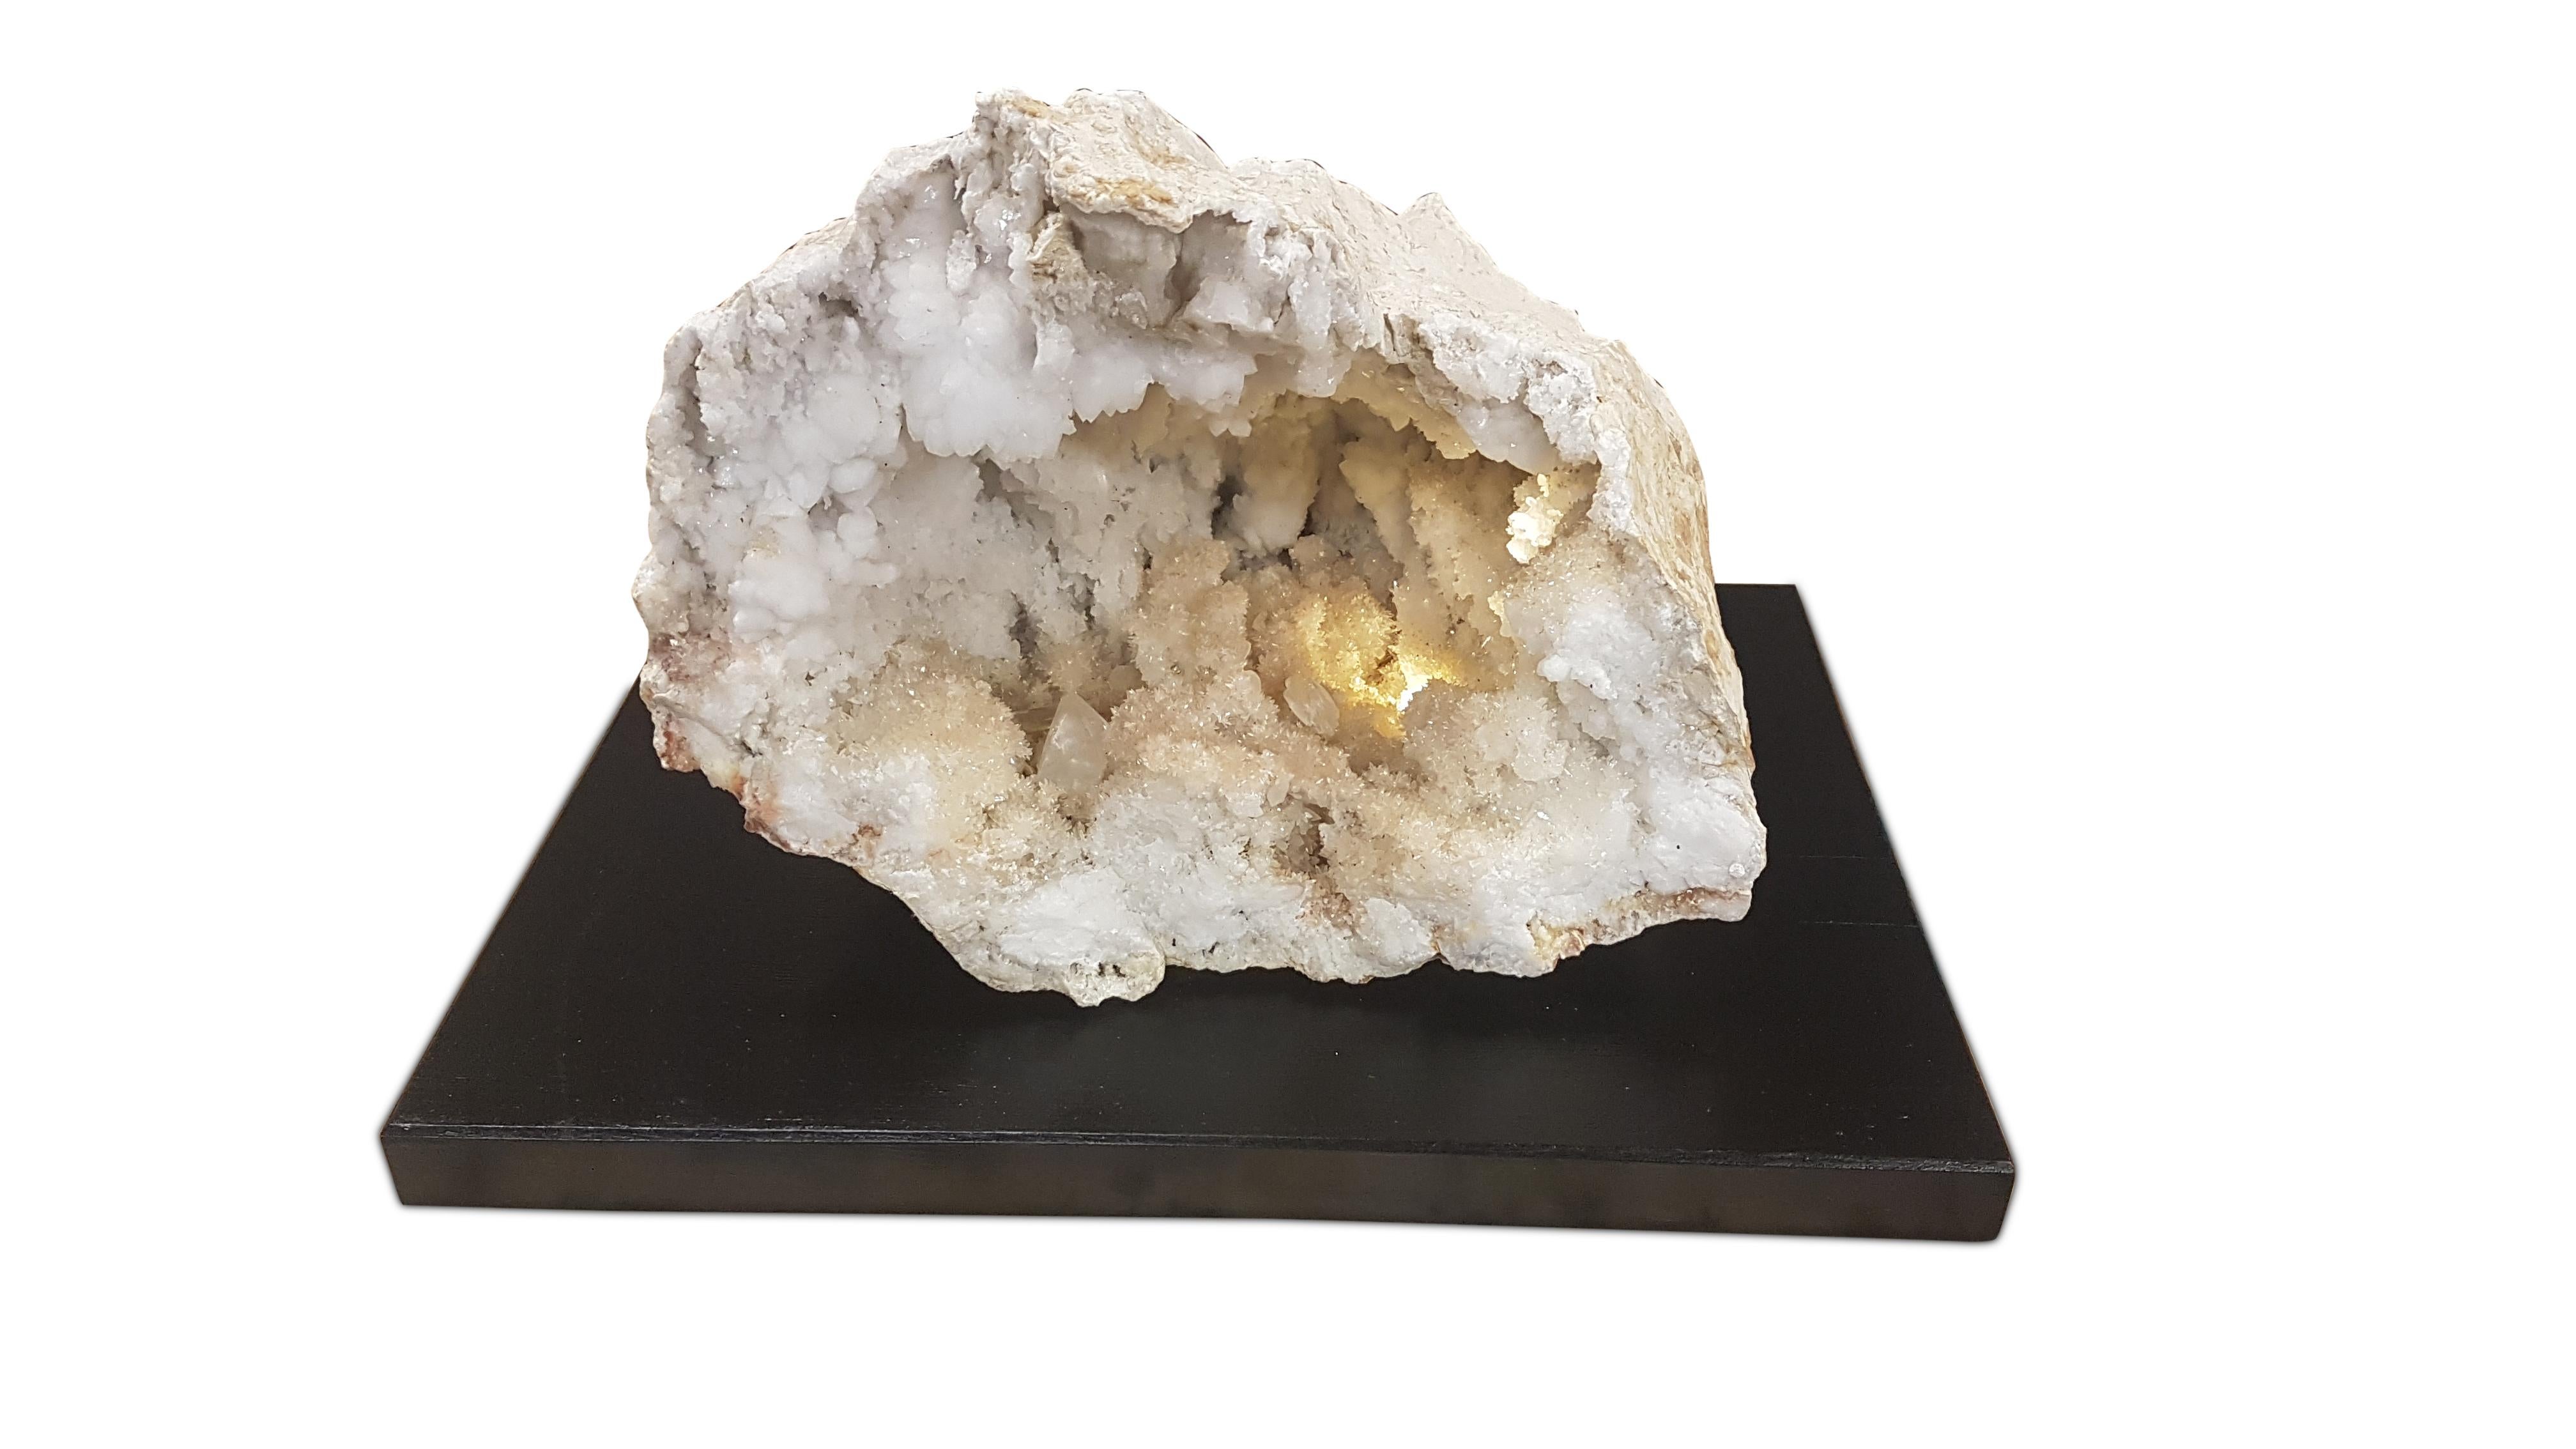 Large Pair of Natural Geodes on Stands with Internal Lights (Ebonisiert) im Angebot